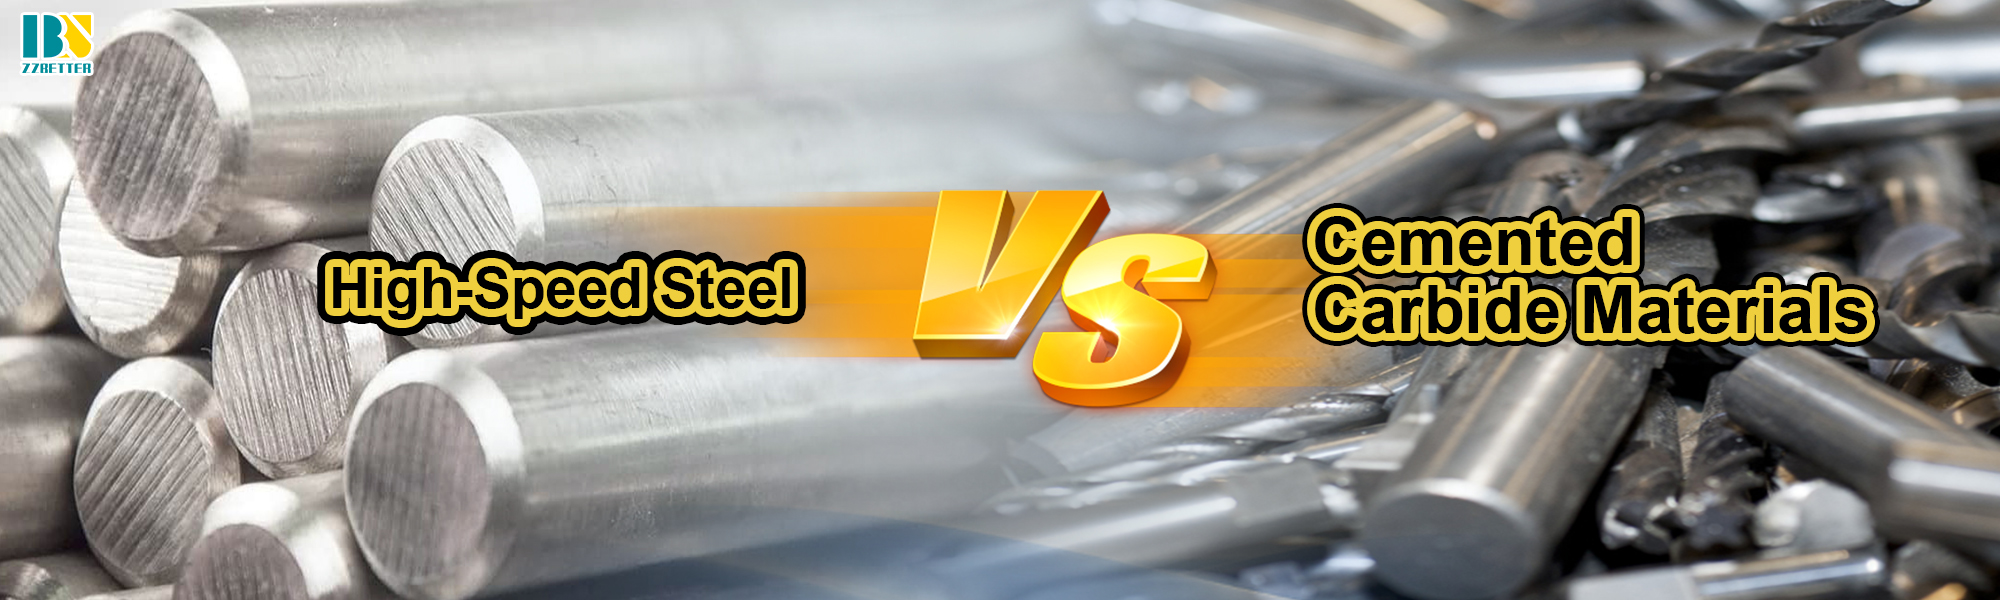 Comparison of High-Speed Steel and Cemented Carbide Materials